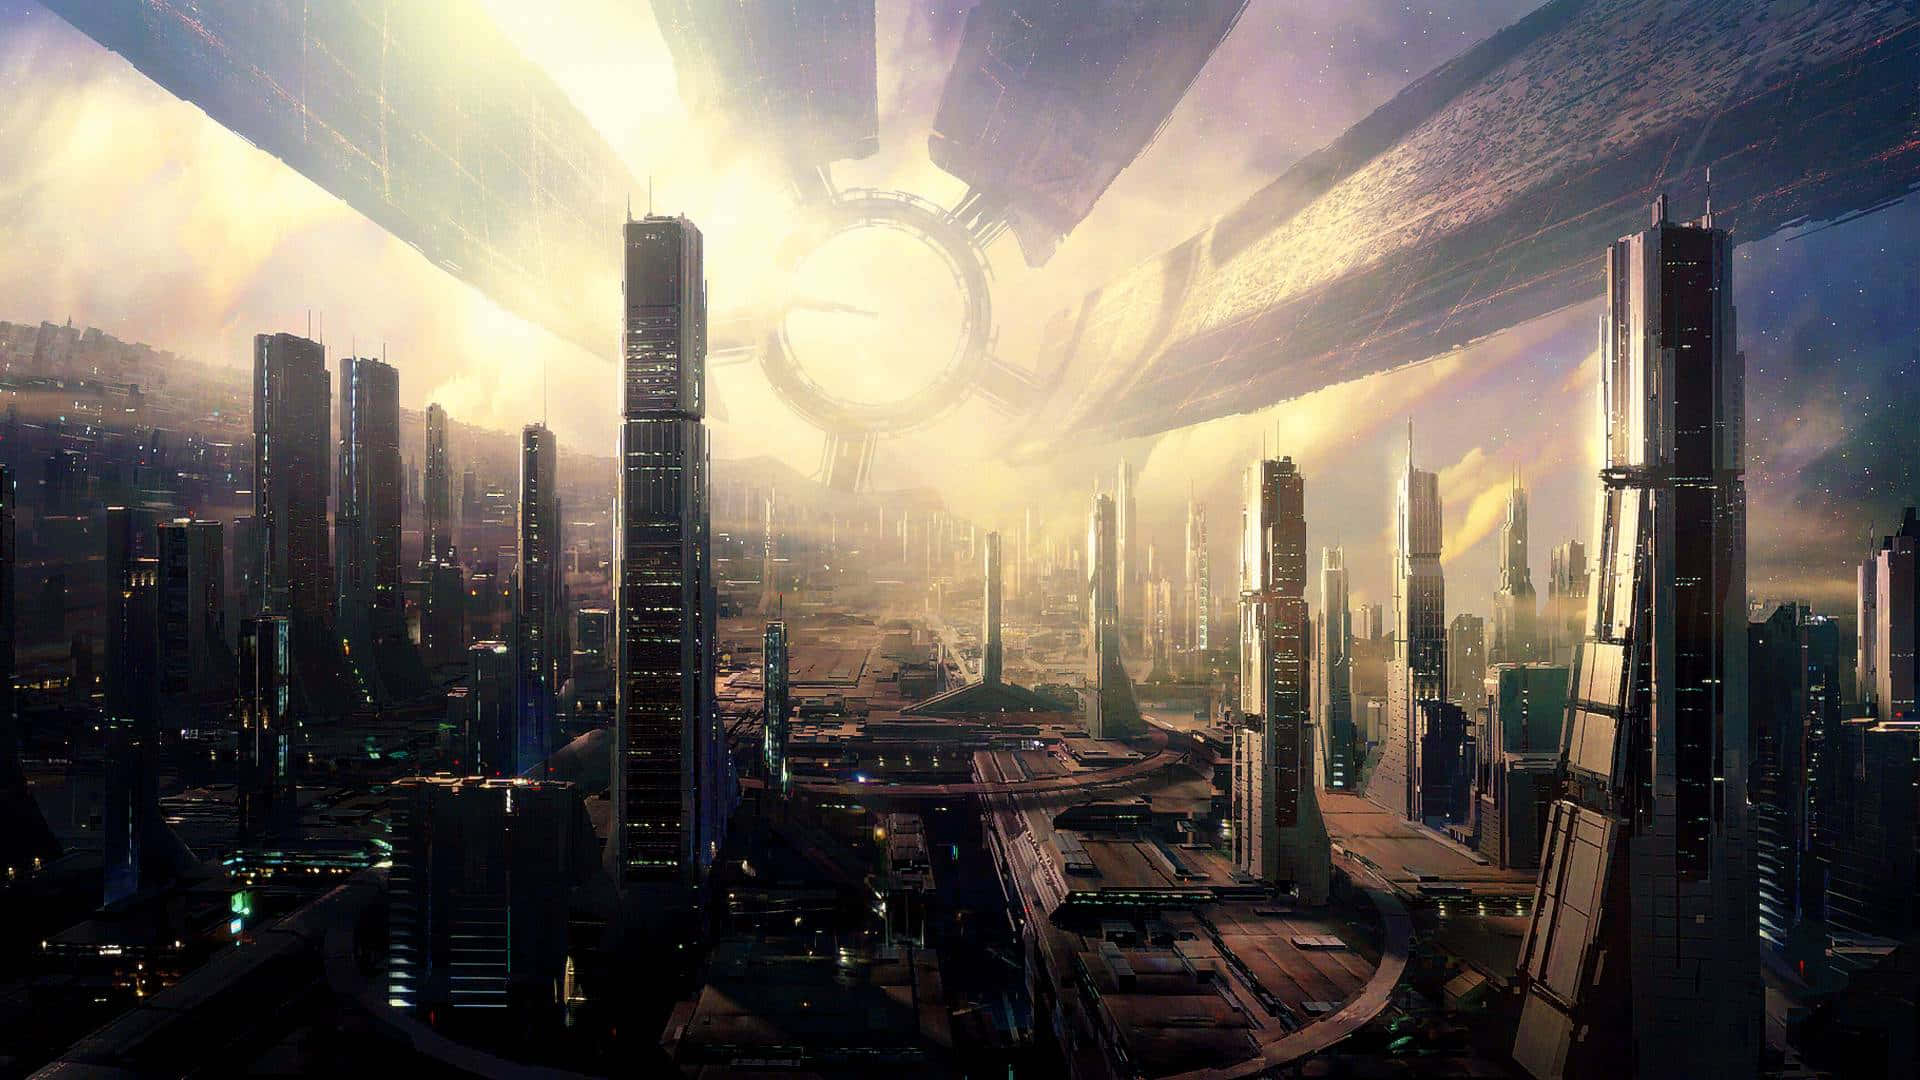 Enter a world of the future with this enigmatic, sci-fi setting